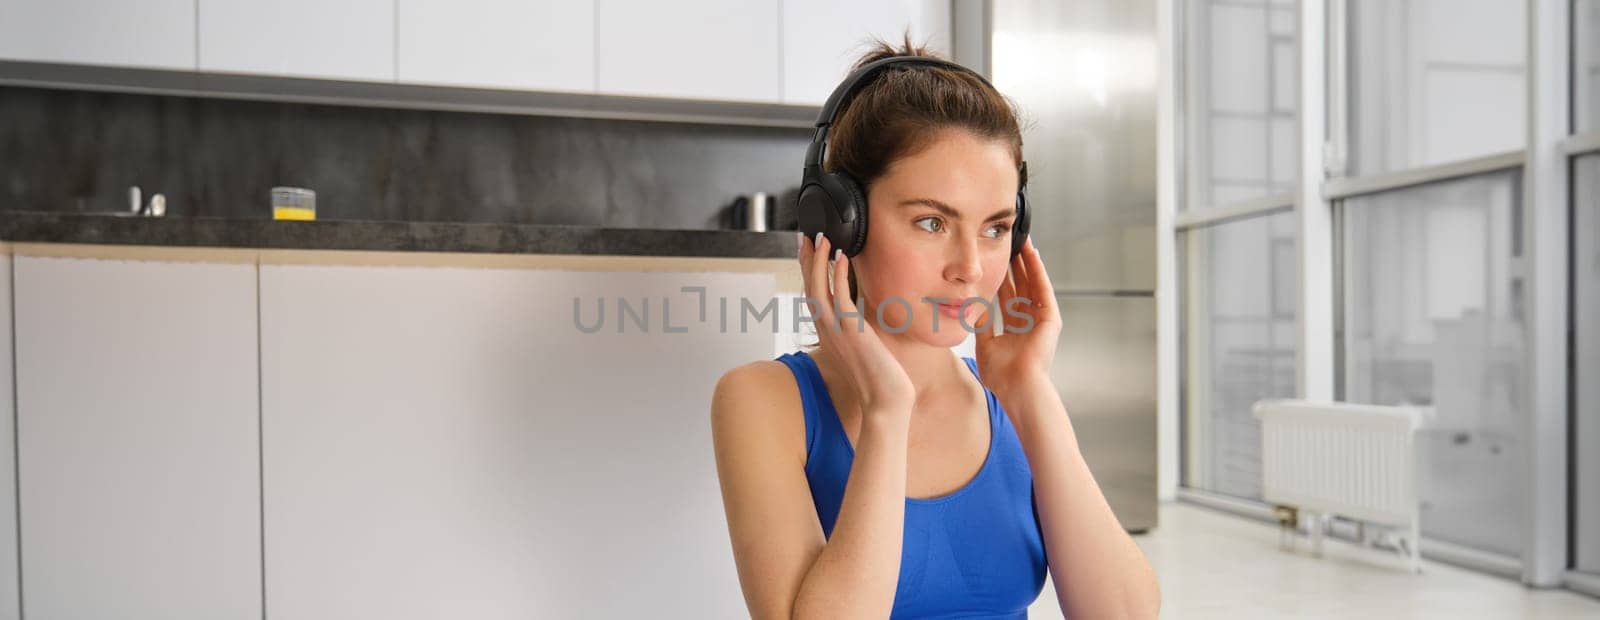 Image of fitness girl doing sports at home, puts on wireless headphones for music during workout training session, wearing blue sportsbra.